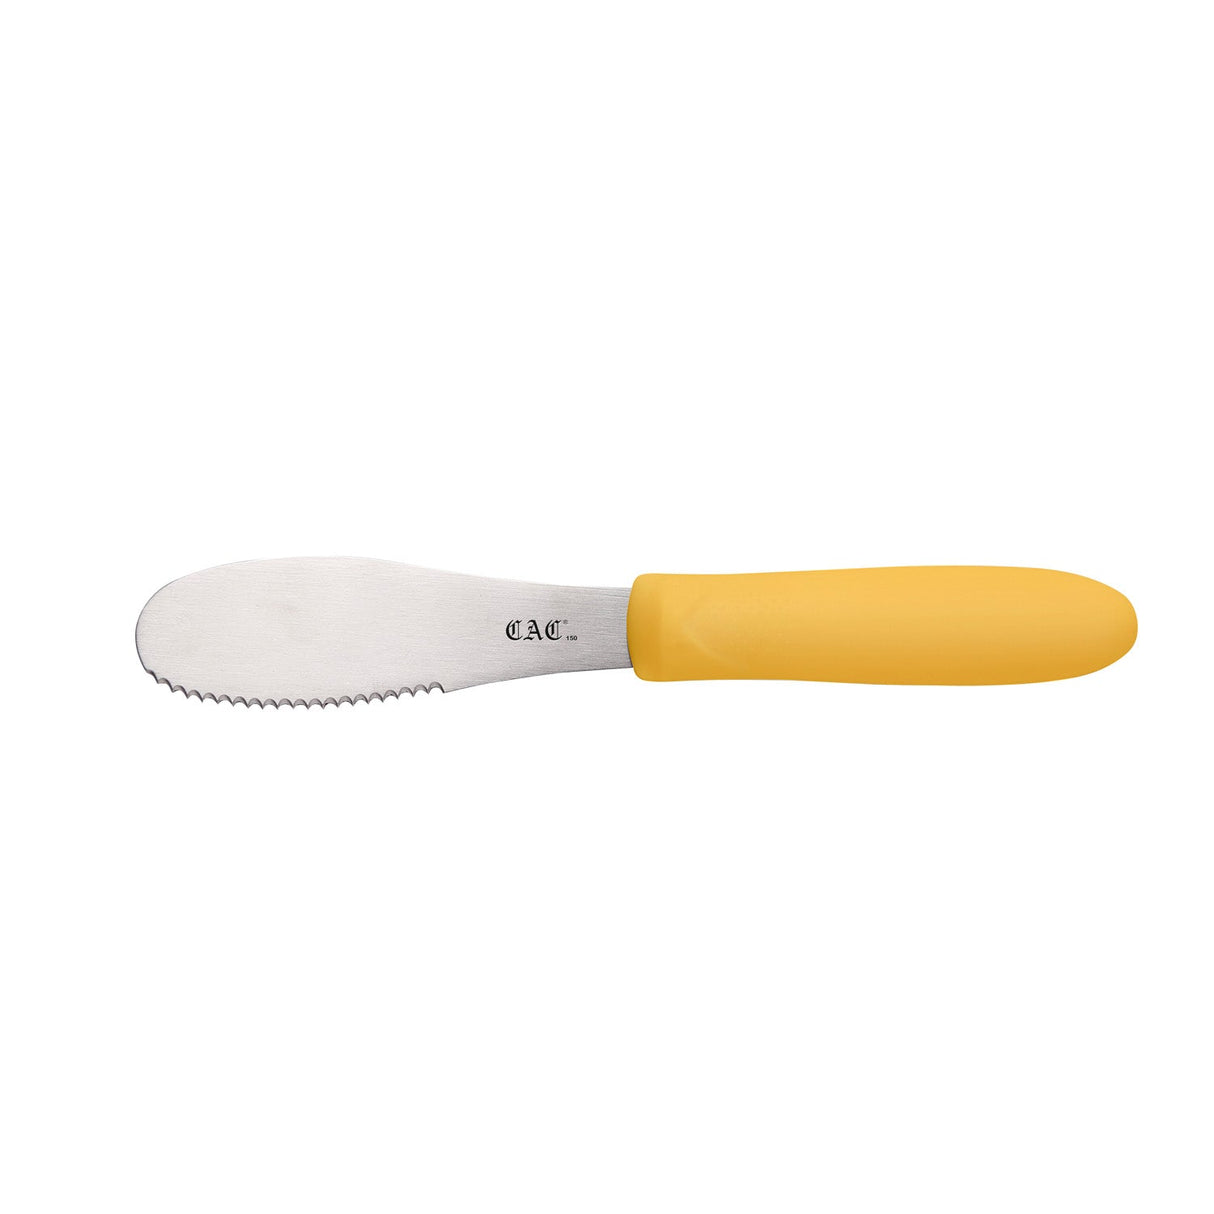 Spreader SS Serrated Plastic Hdl 3-7/8" Yellow